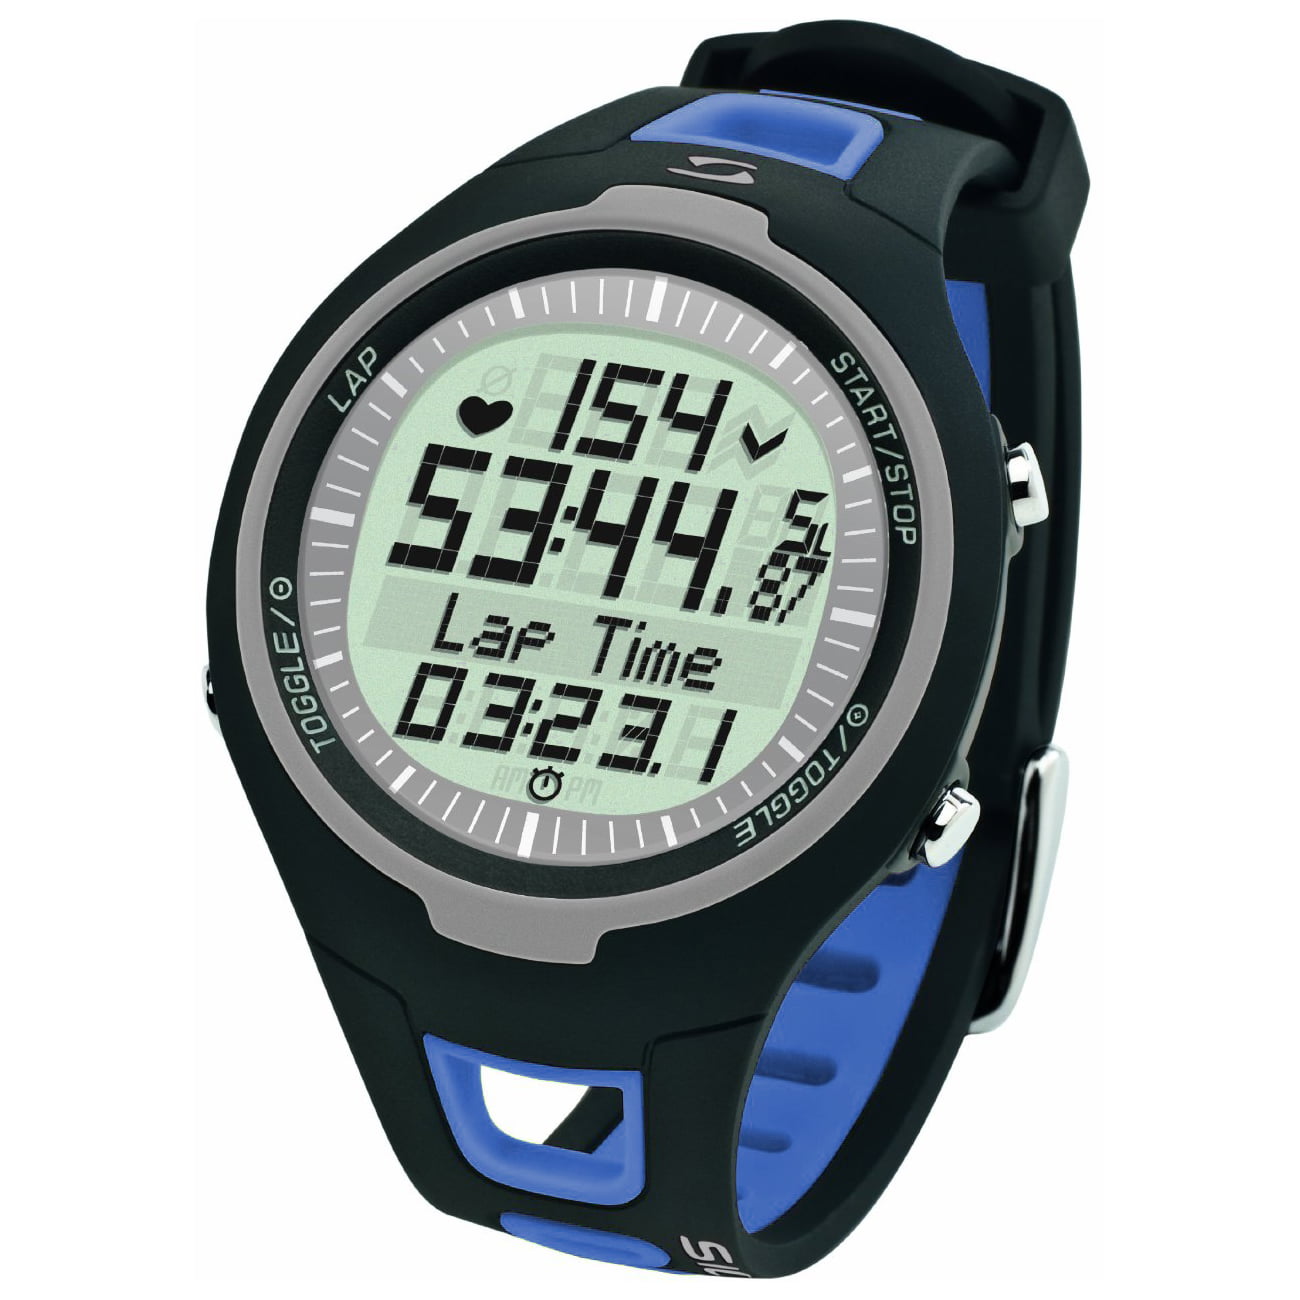 Sigma PC 15.11 Heart Rate Monitor Sports Digital Wrist Watch with ...